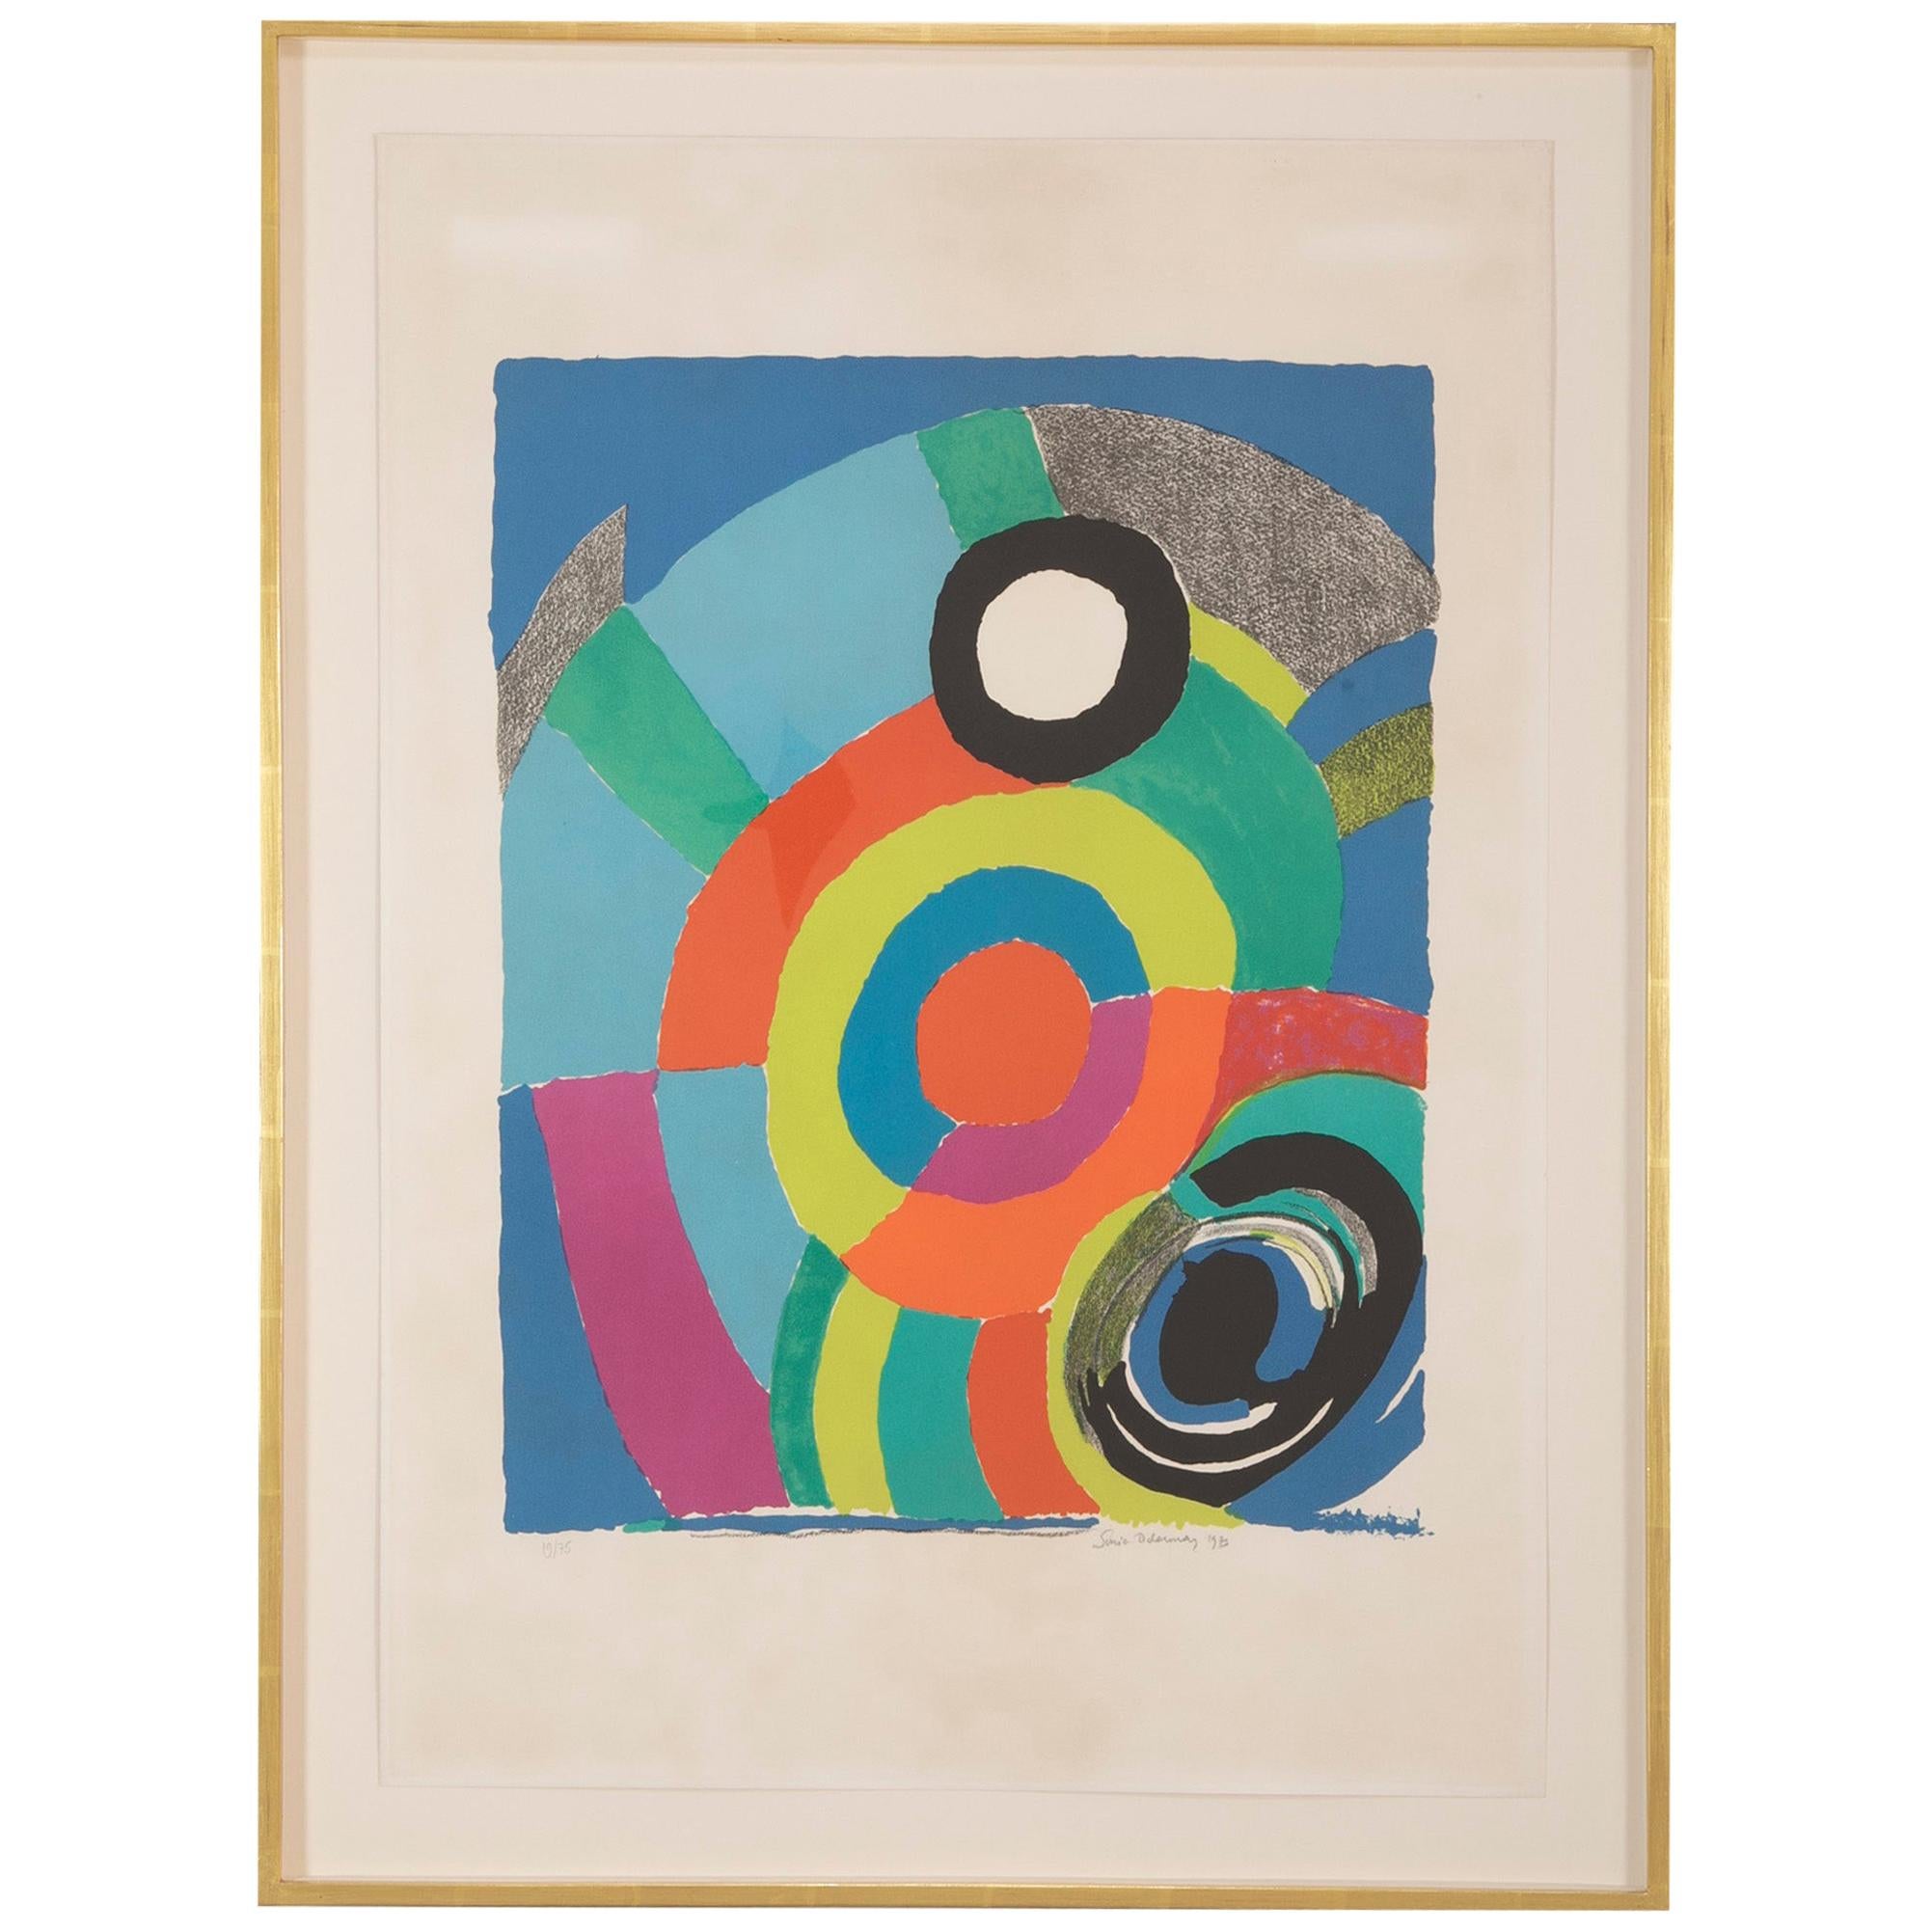 "Tourbillion. 1979" Lithograph in Colors by Sonia Delaunay For Sale